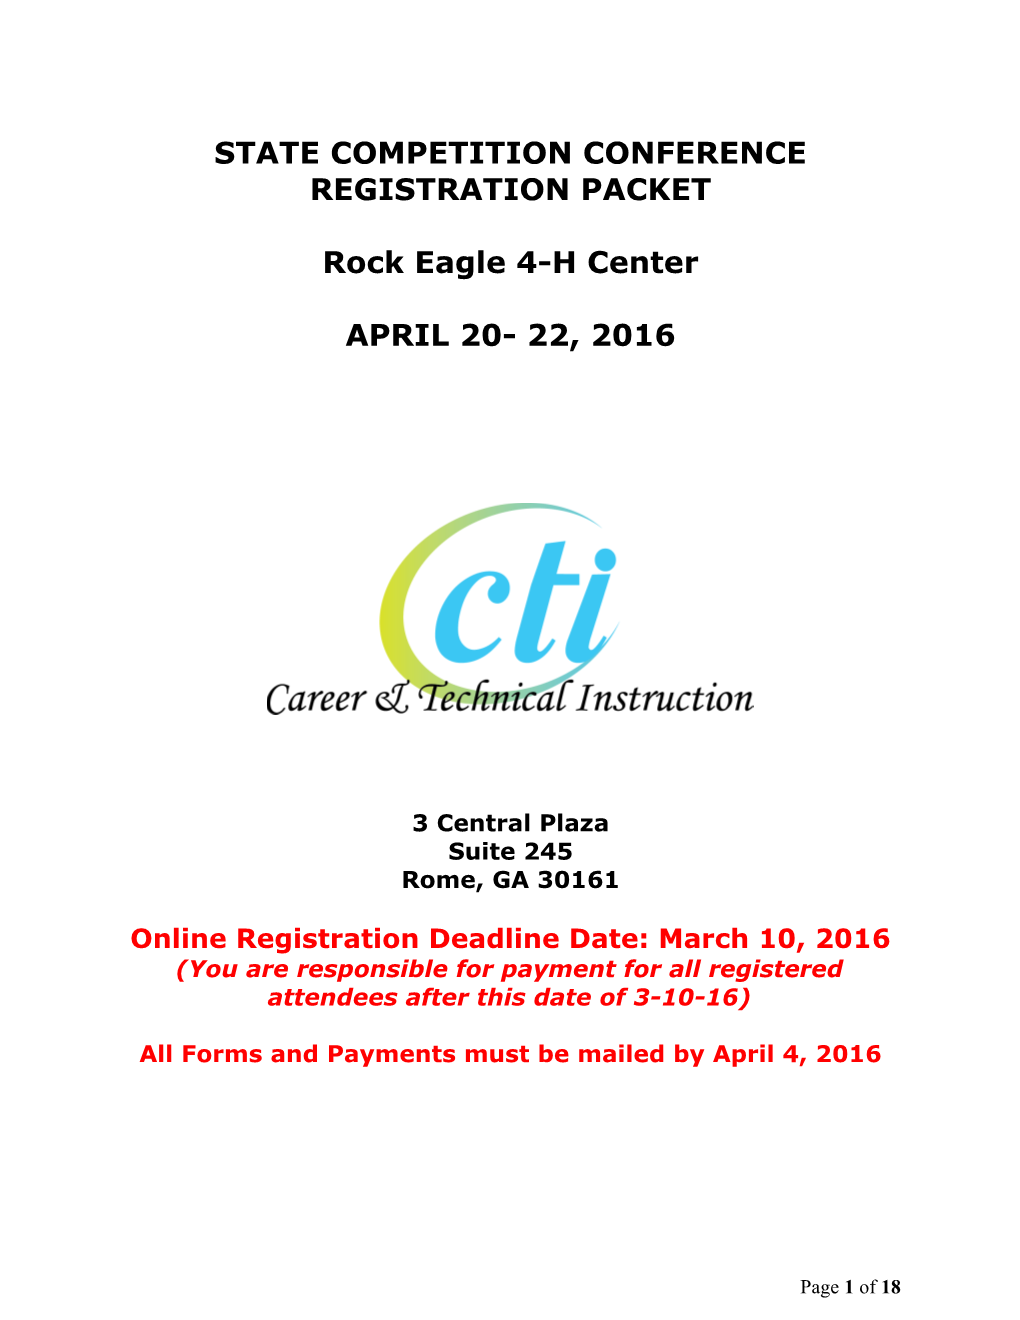 State Conference Registration Packet